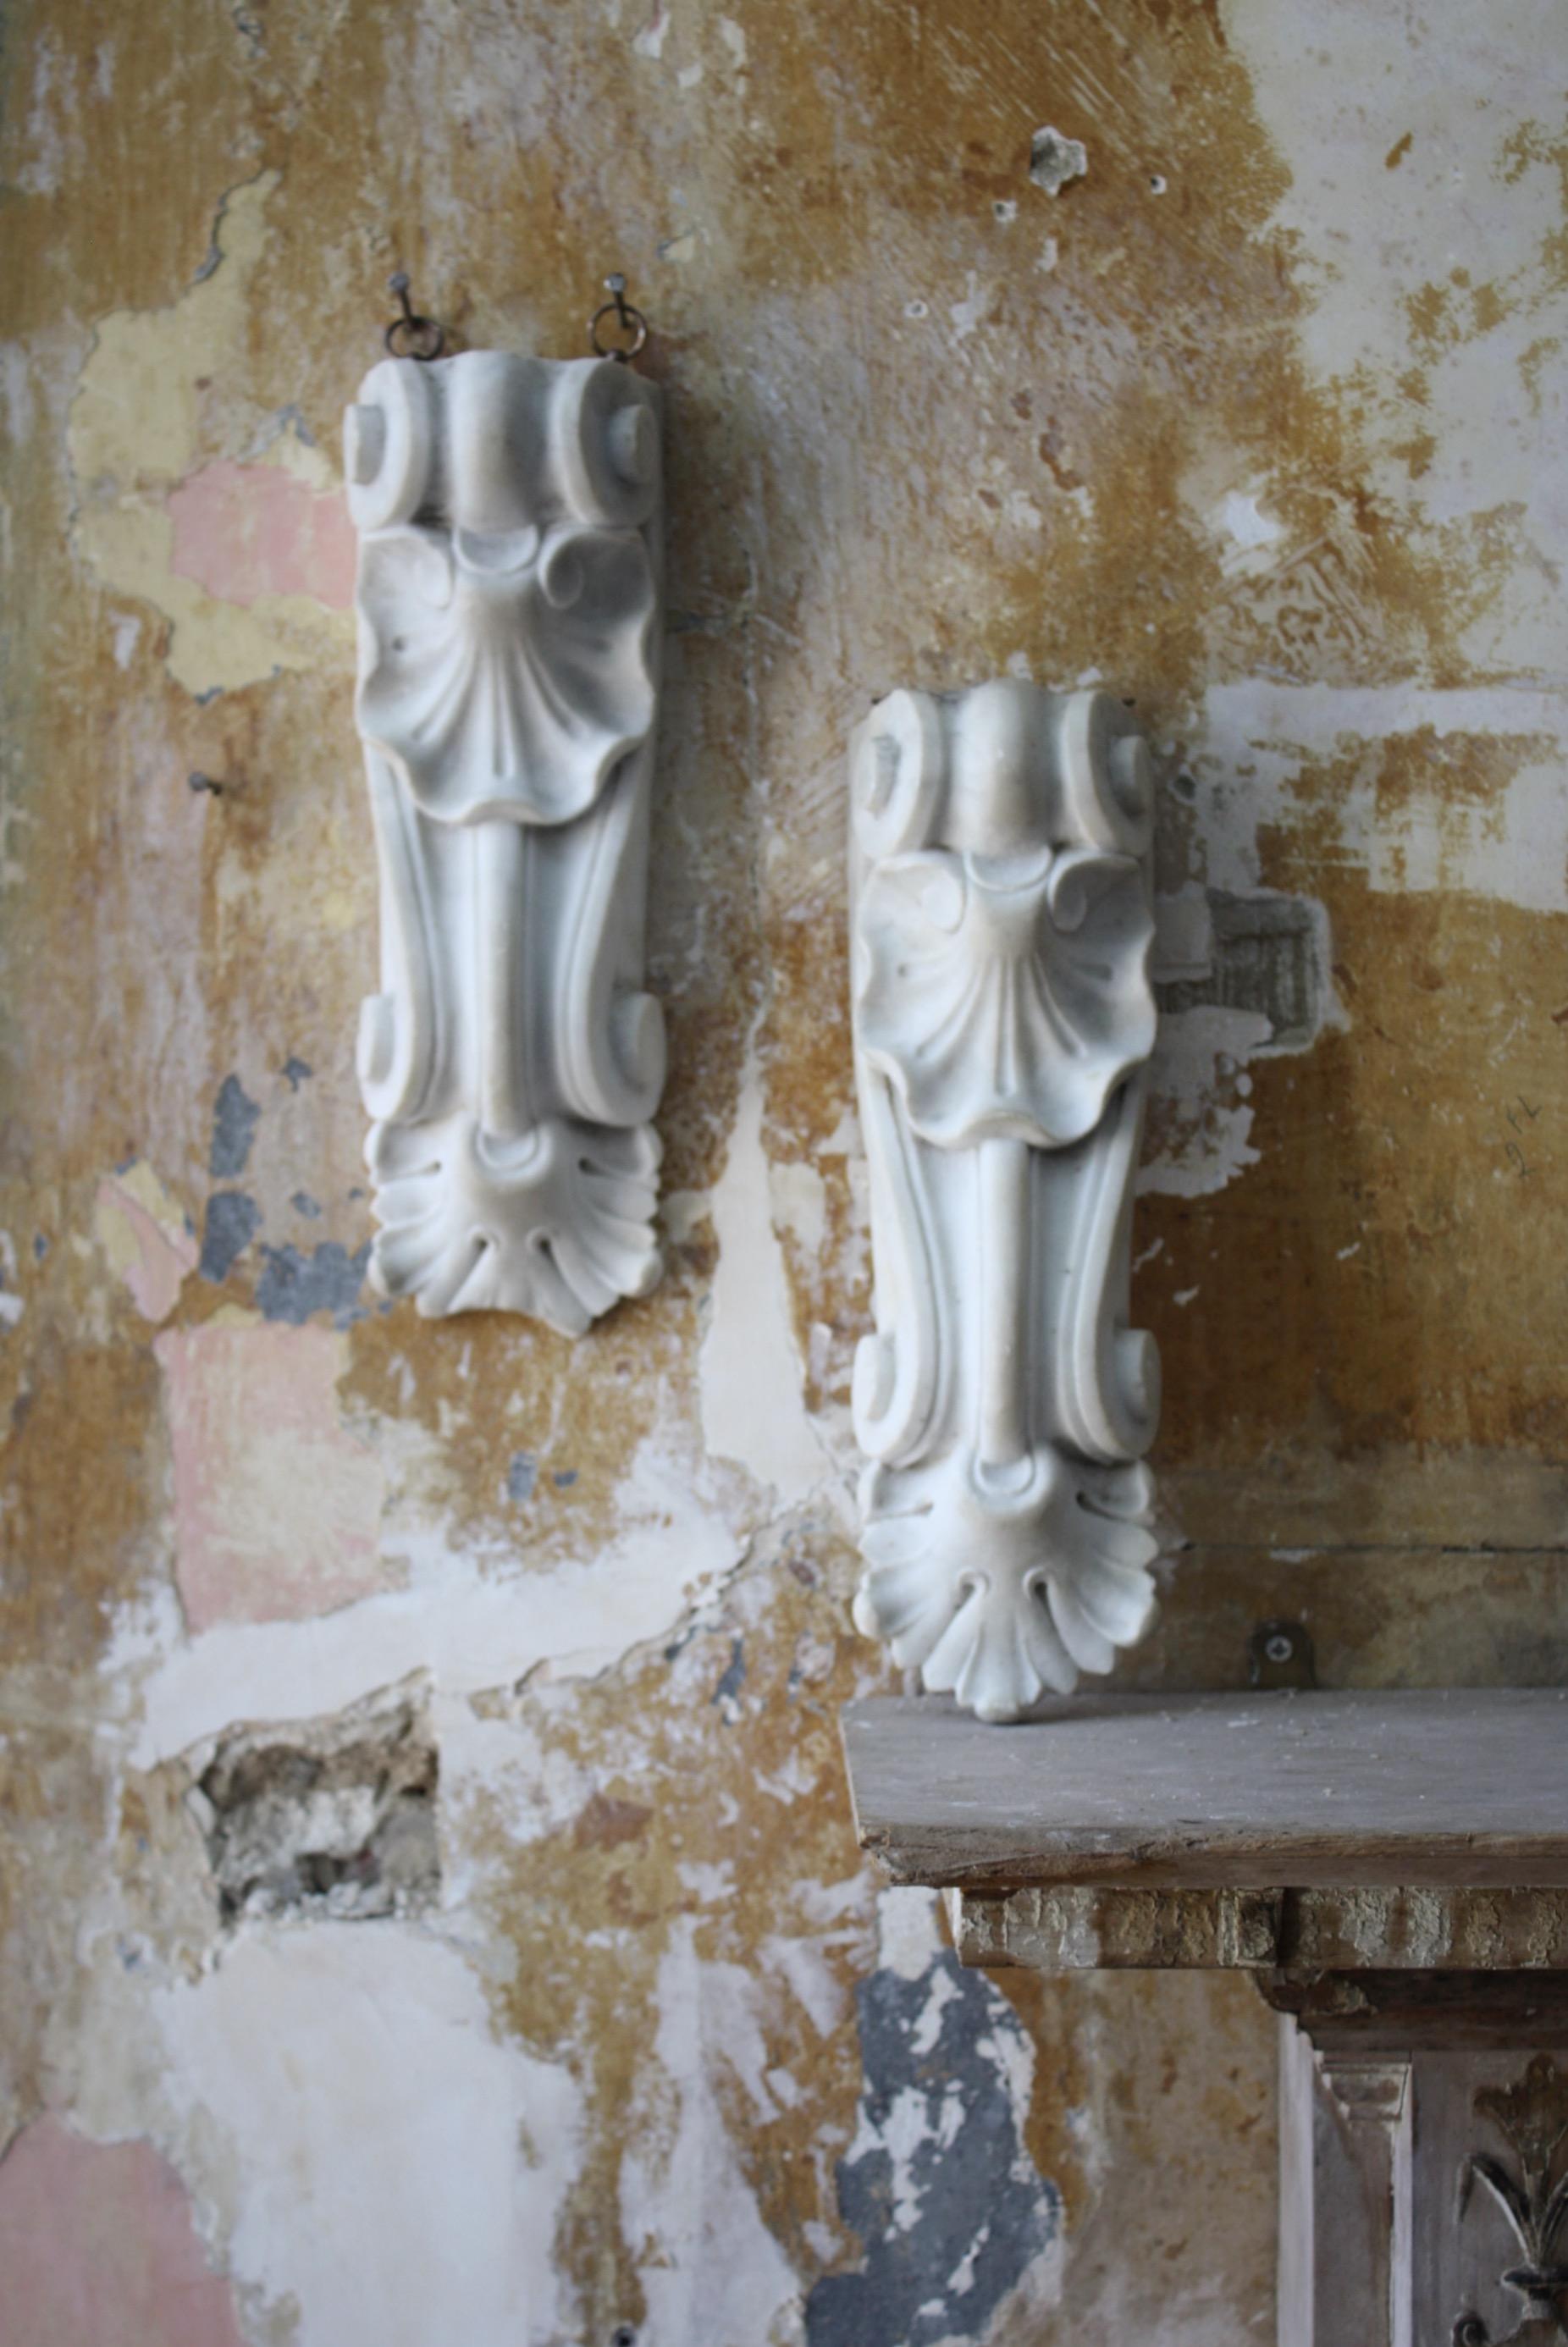 A pair of carved marble elements floral and organic elements , previously part of larger architectural feature like a grand fireplace.

The sections are very well carved and have a good decorative patina, Dating from the early 19th century and